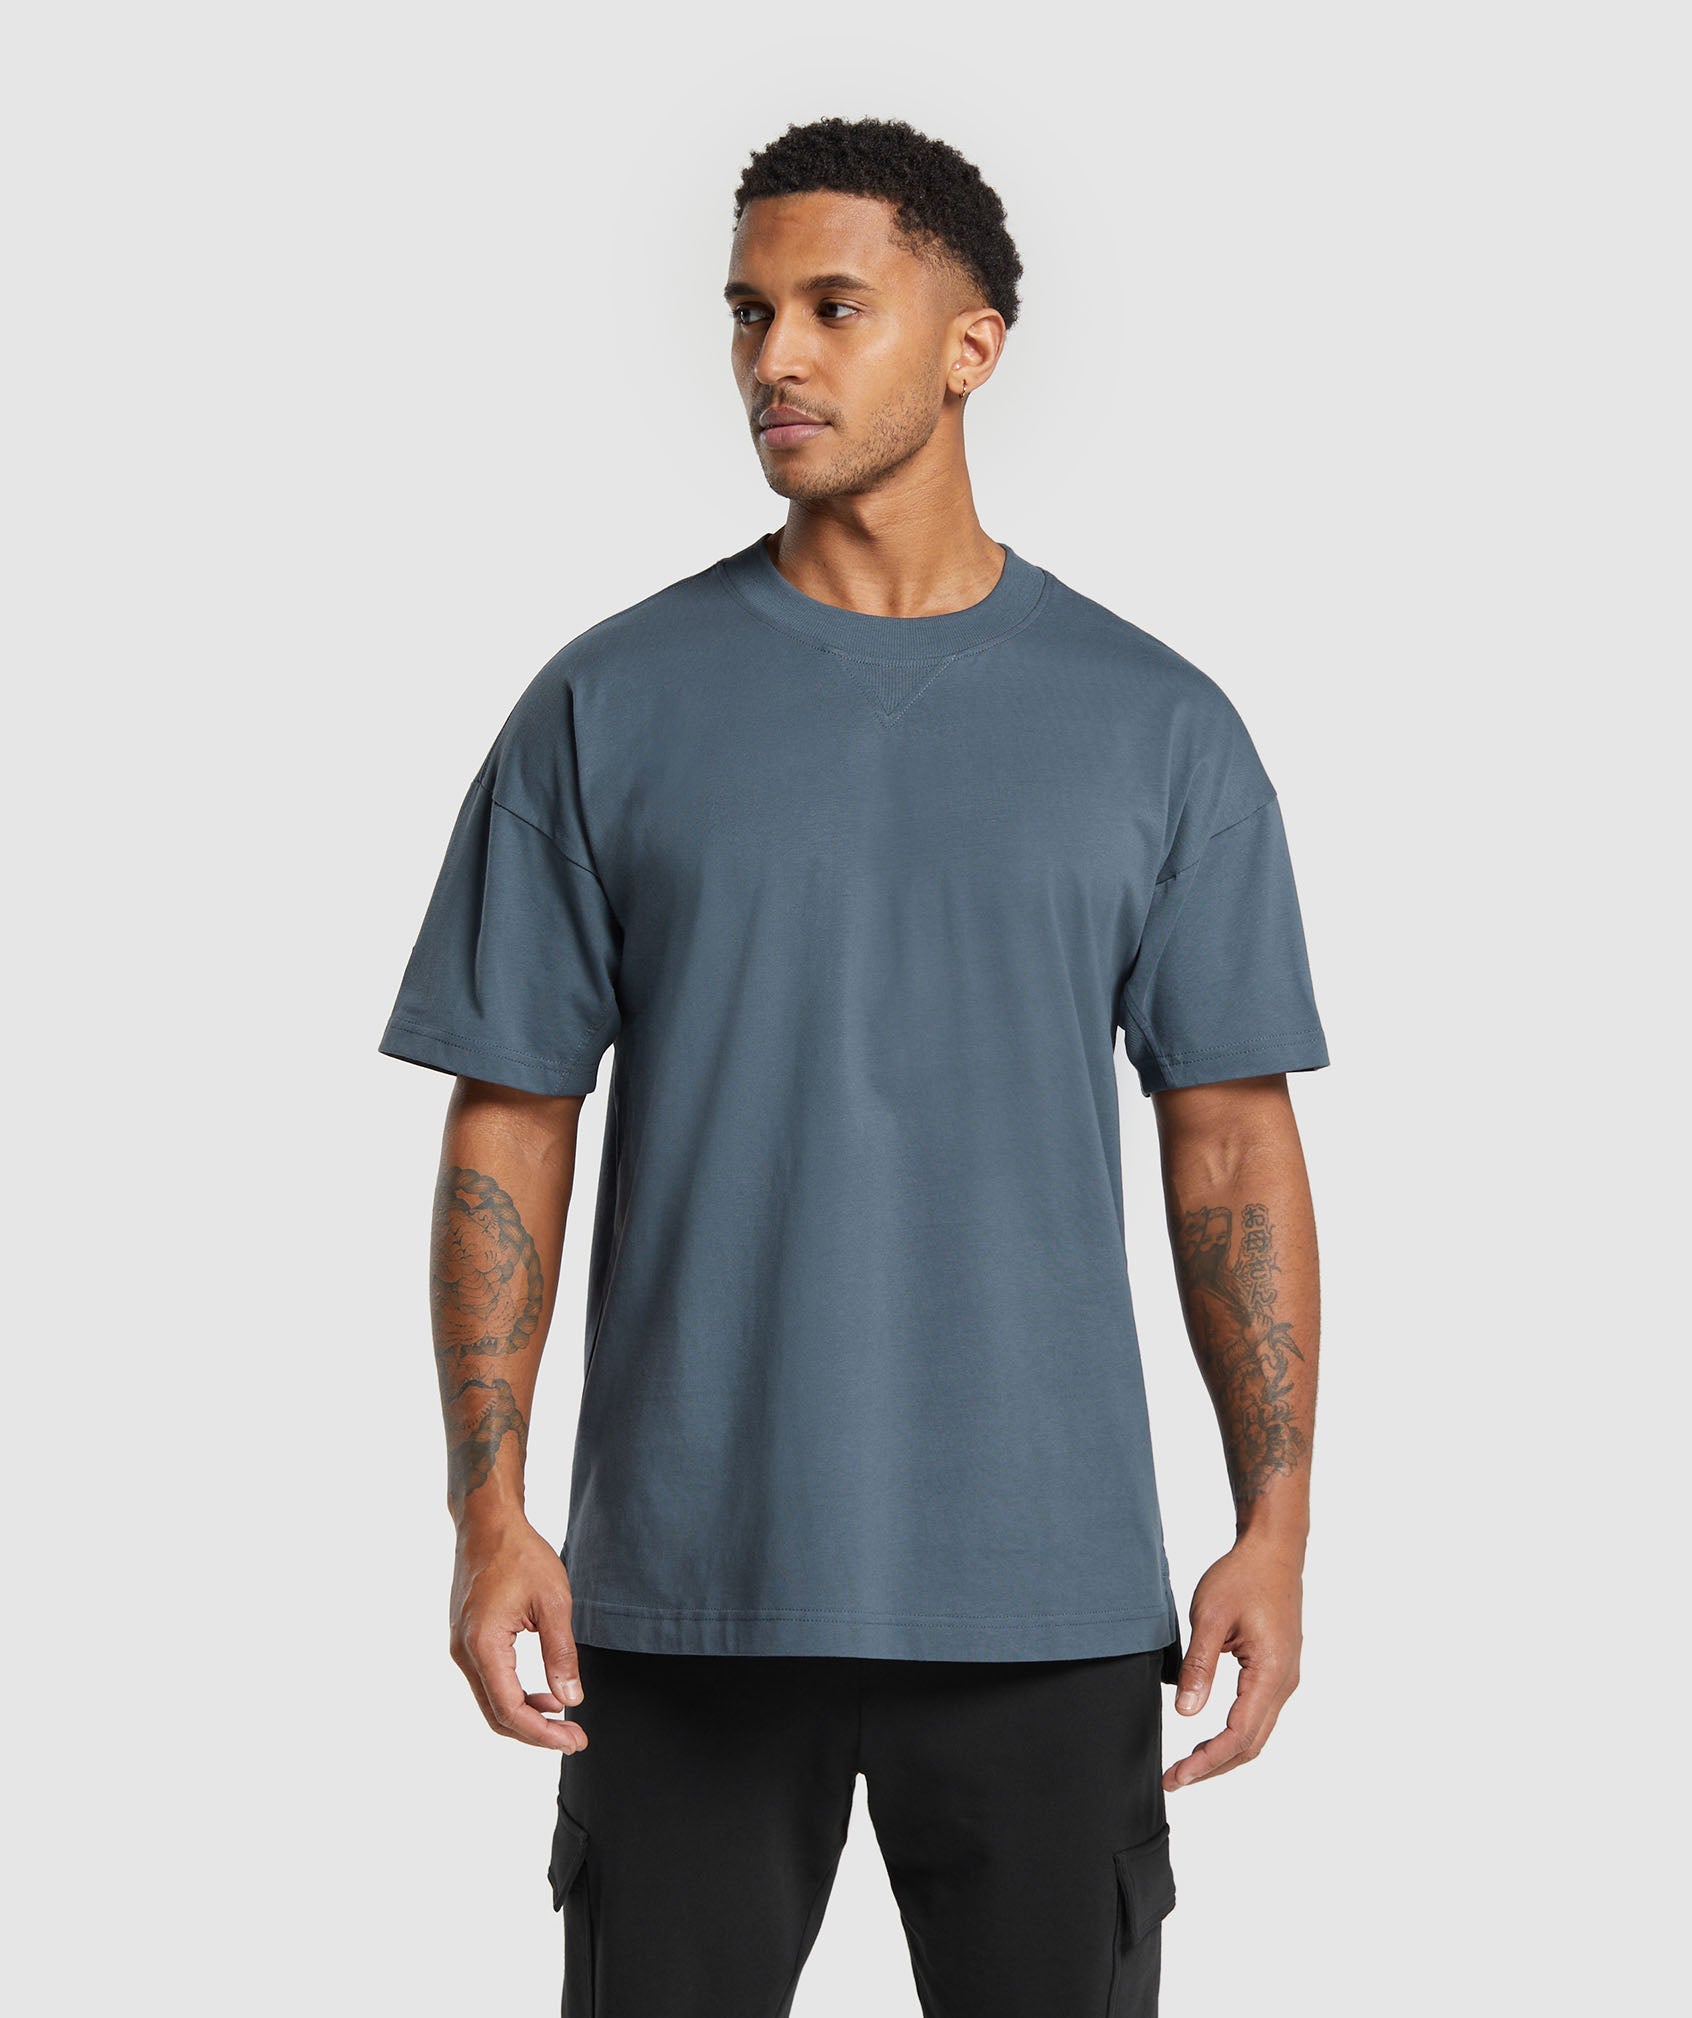 Rest Day Essentials T-Shirt in {{variantColor} is out of stock